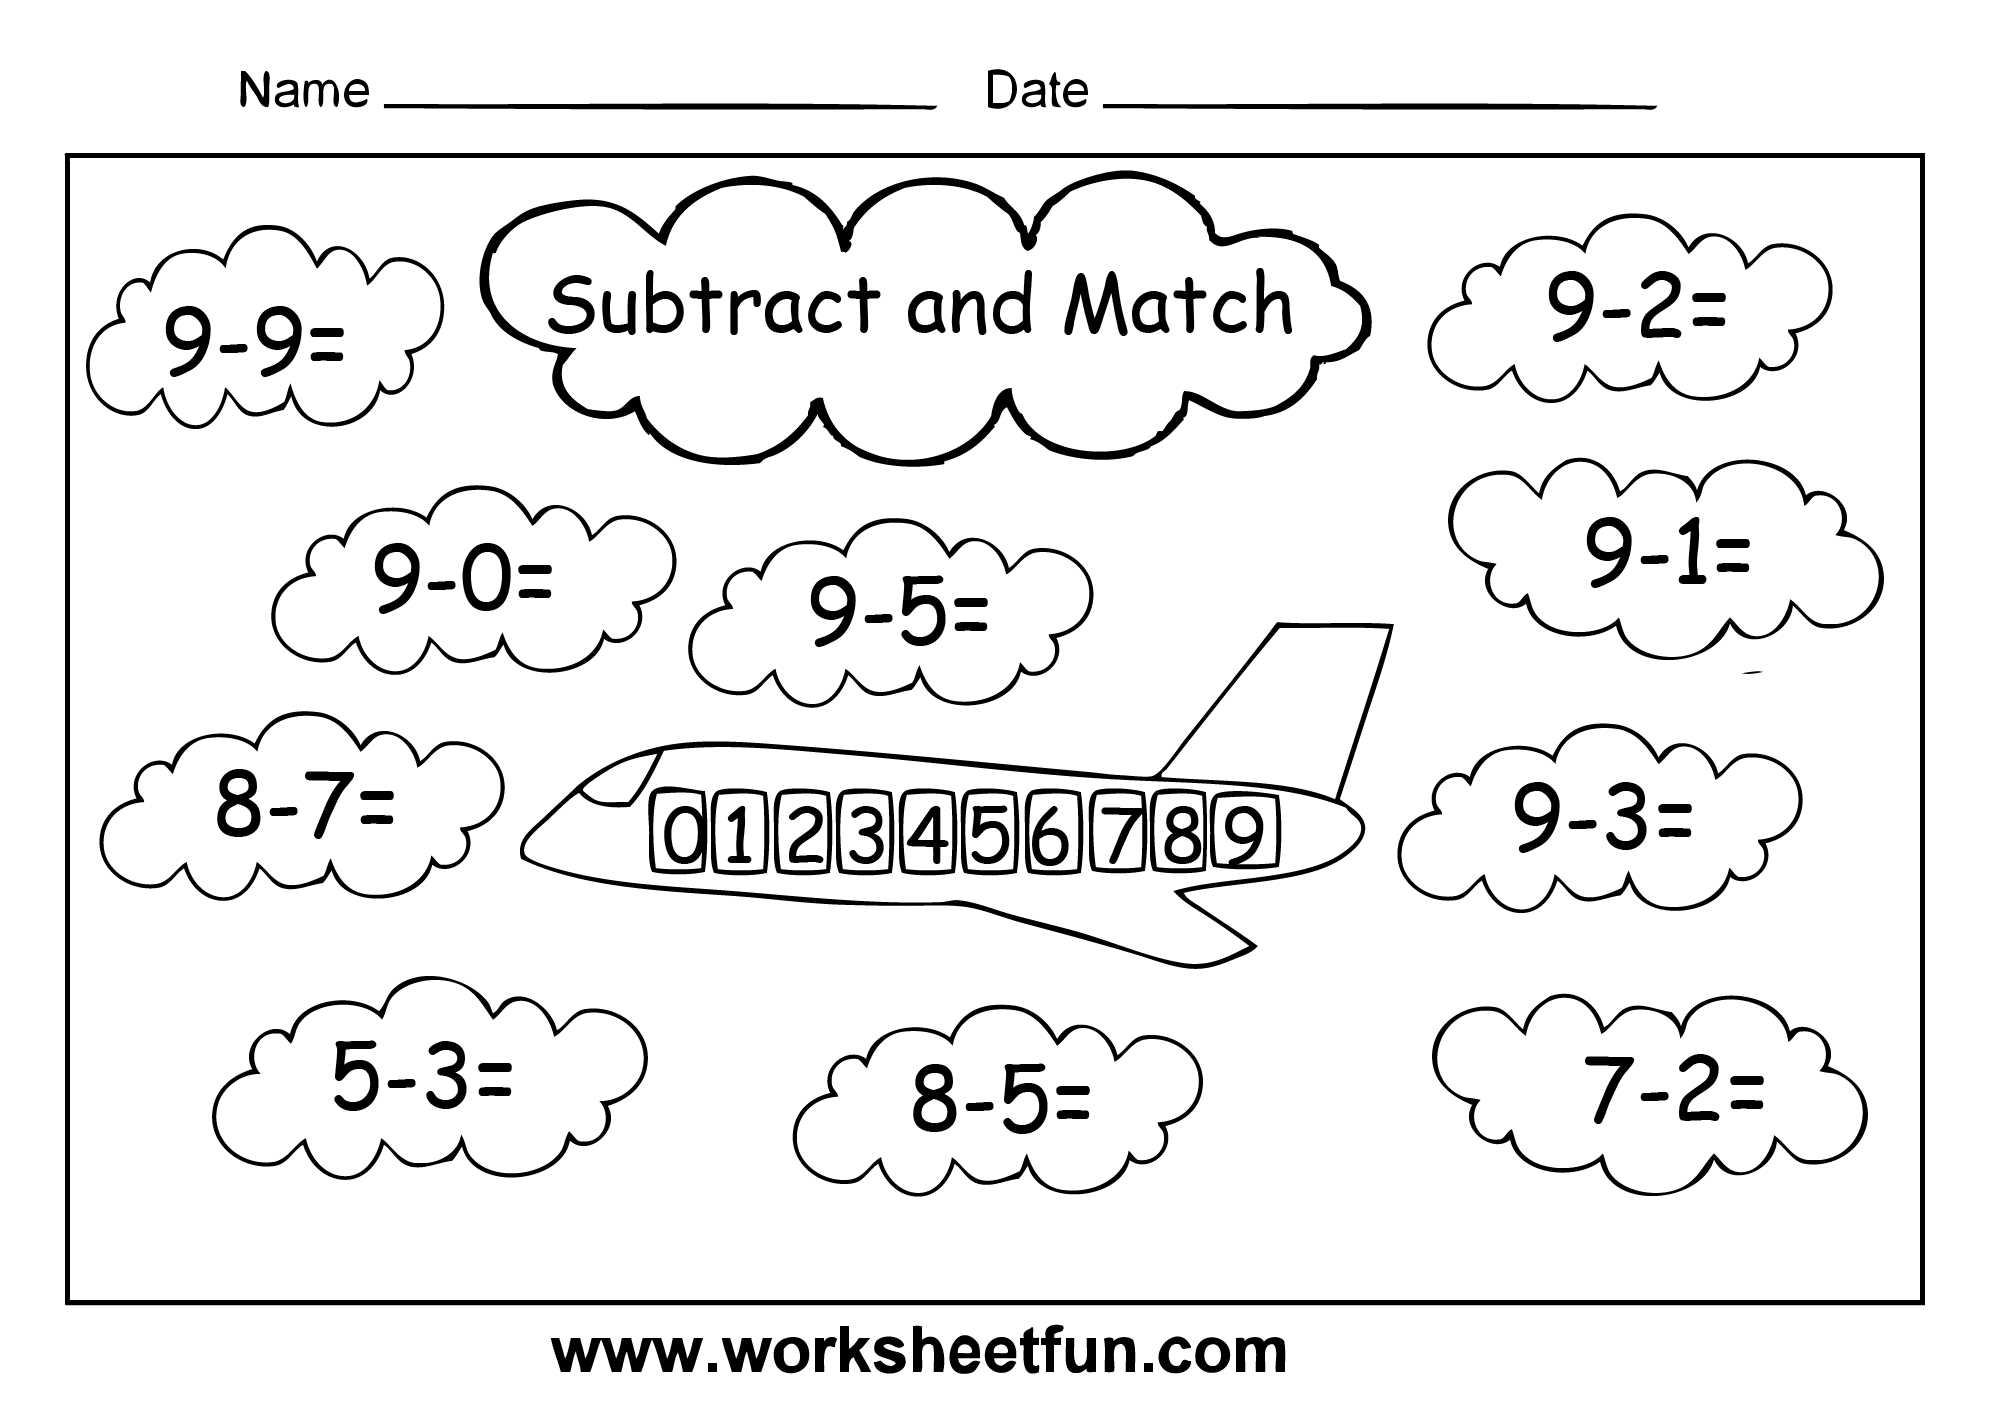 Addition and Subtraction Worksheets for Grade 1 or Printable Worksheets for Grade 1 Math Free Year Maths Pdf Aeroplane